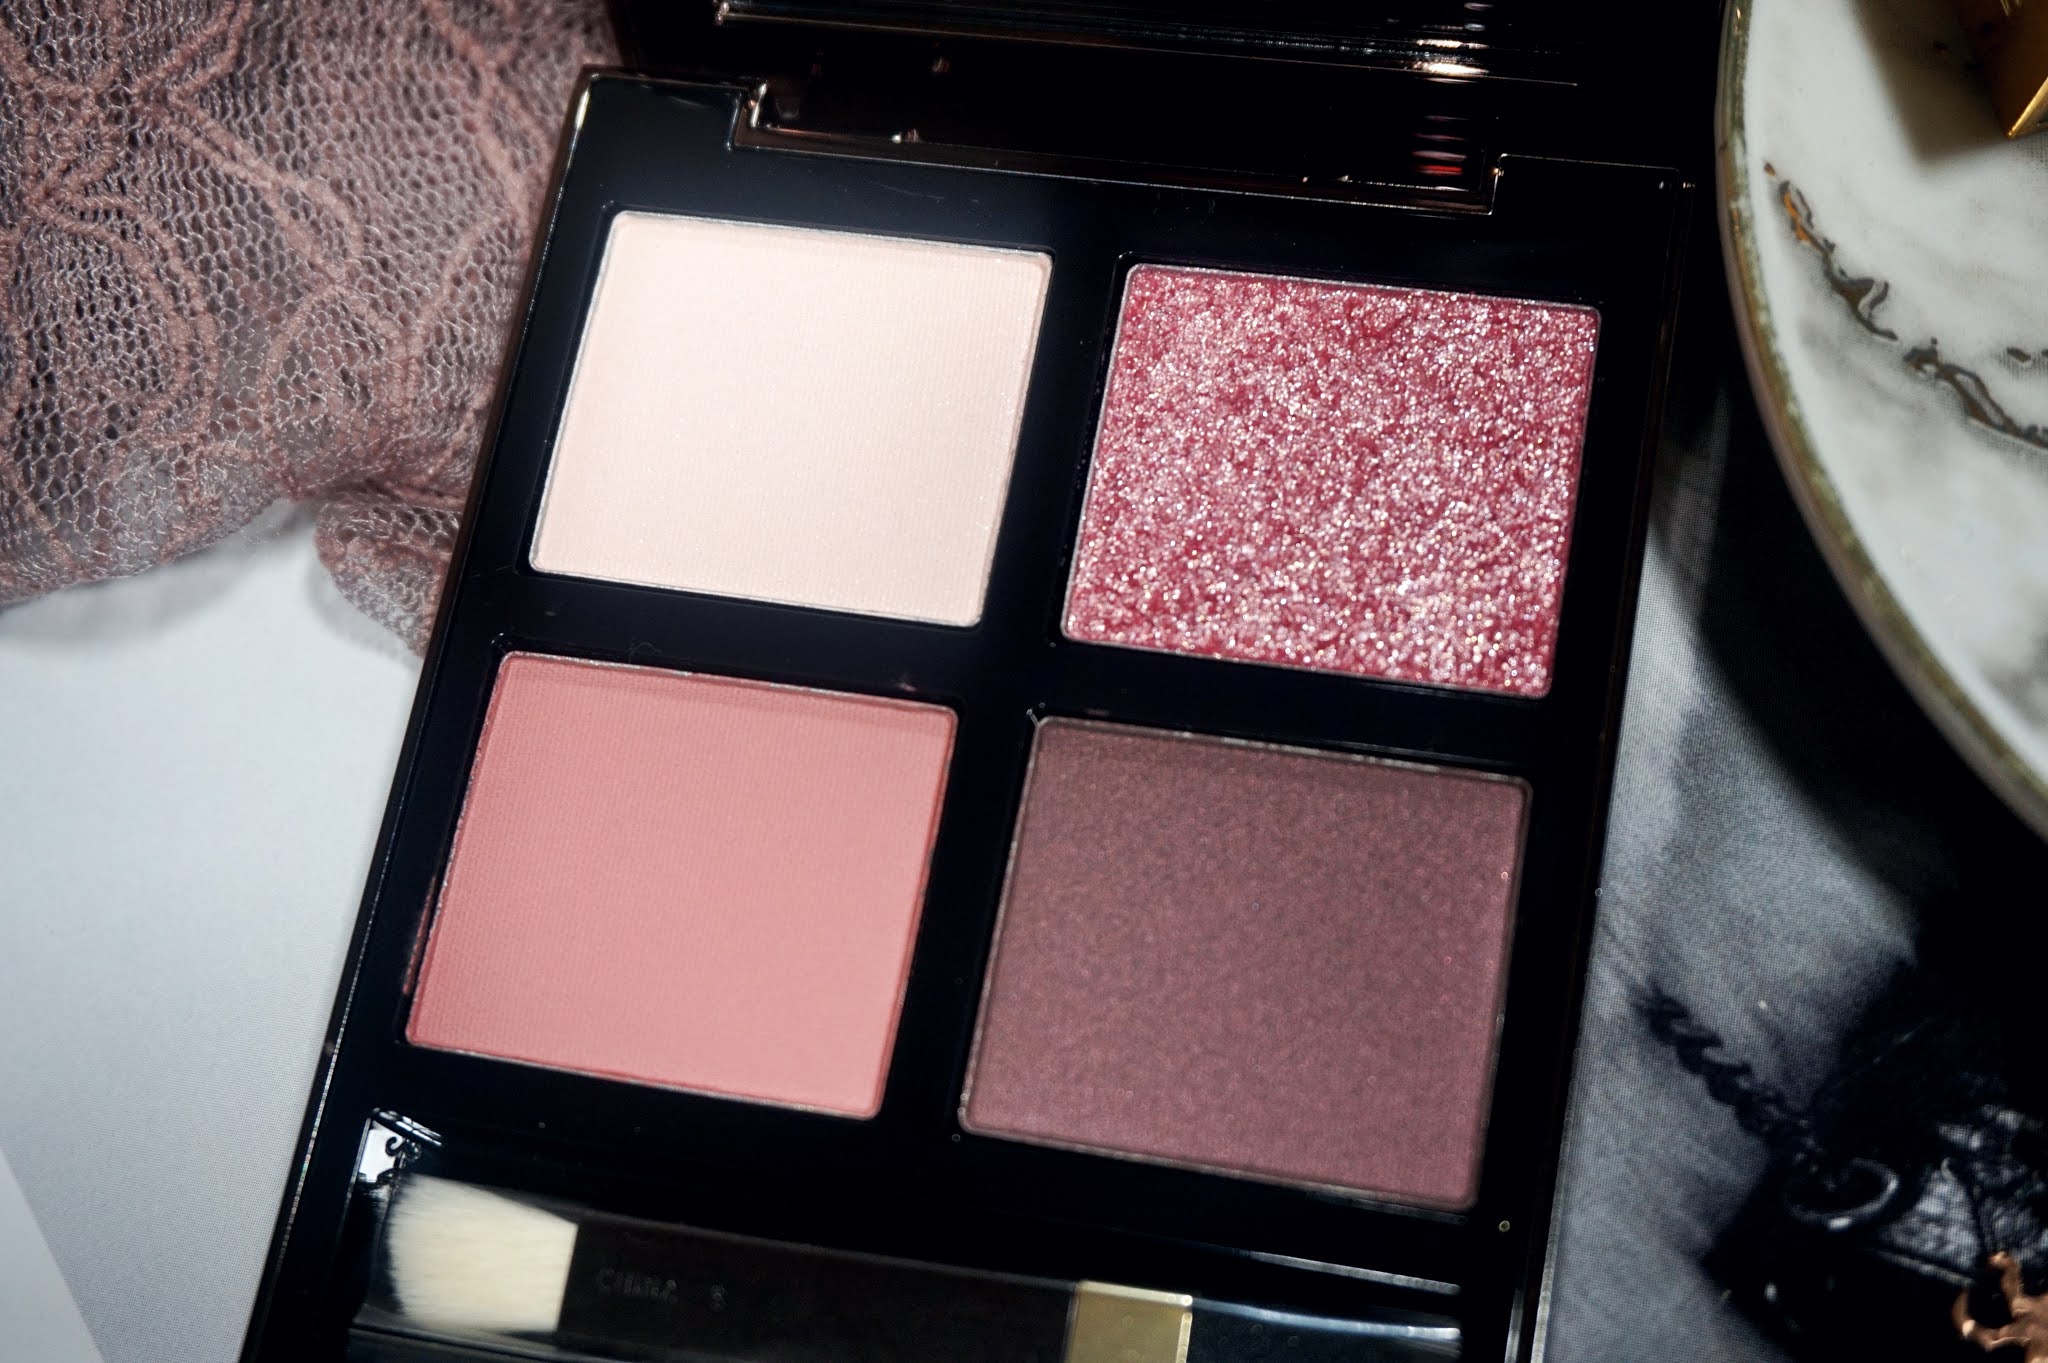 TOM FORD BEAUTY QUAD 030 Insolent Rose-